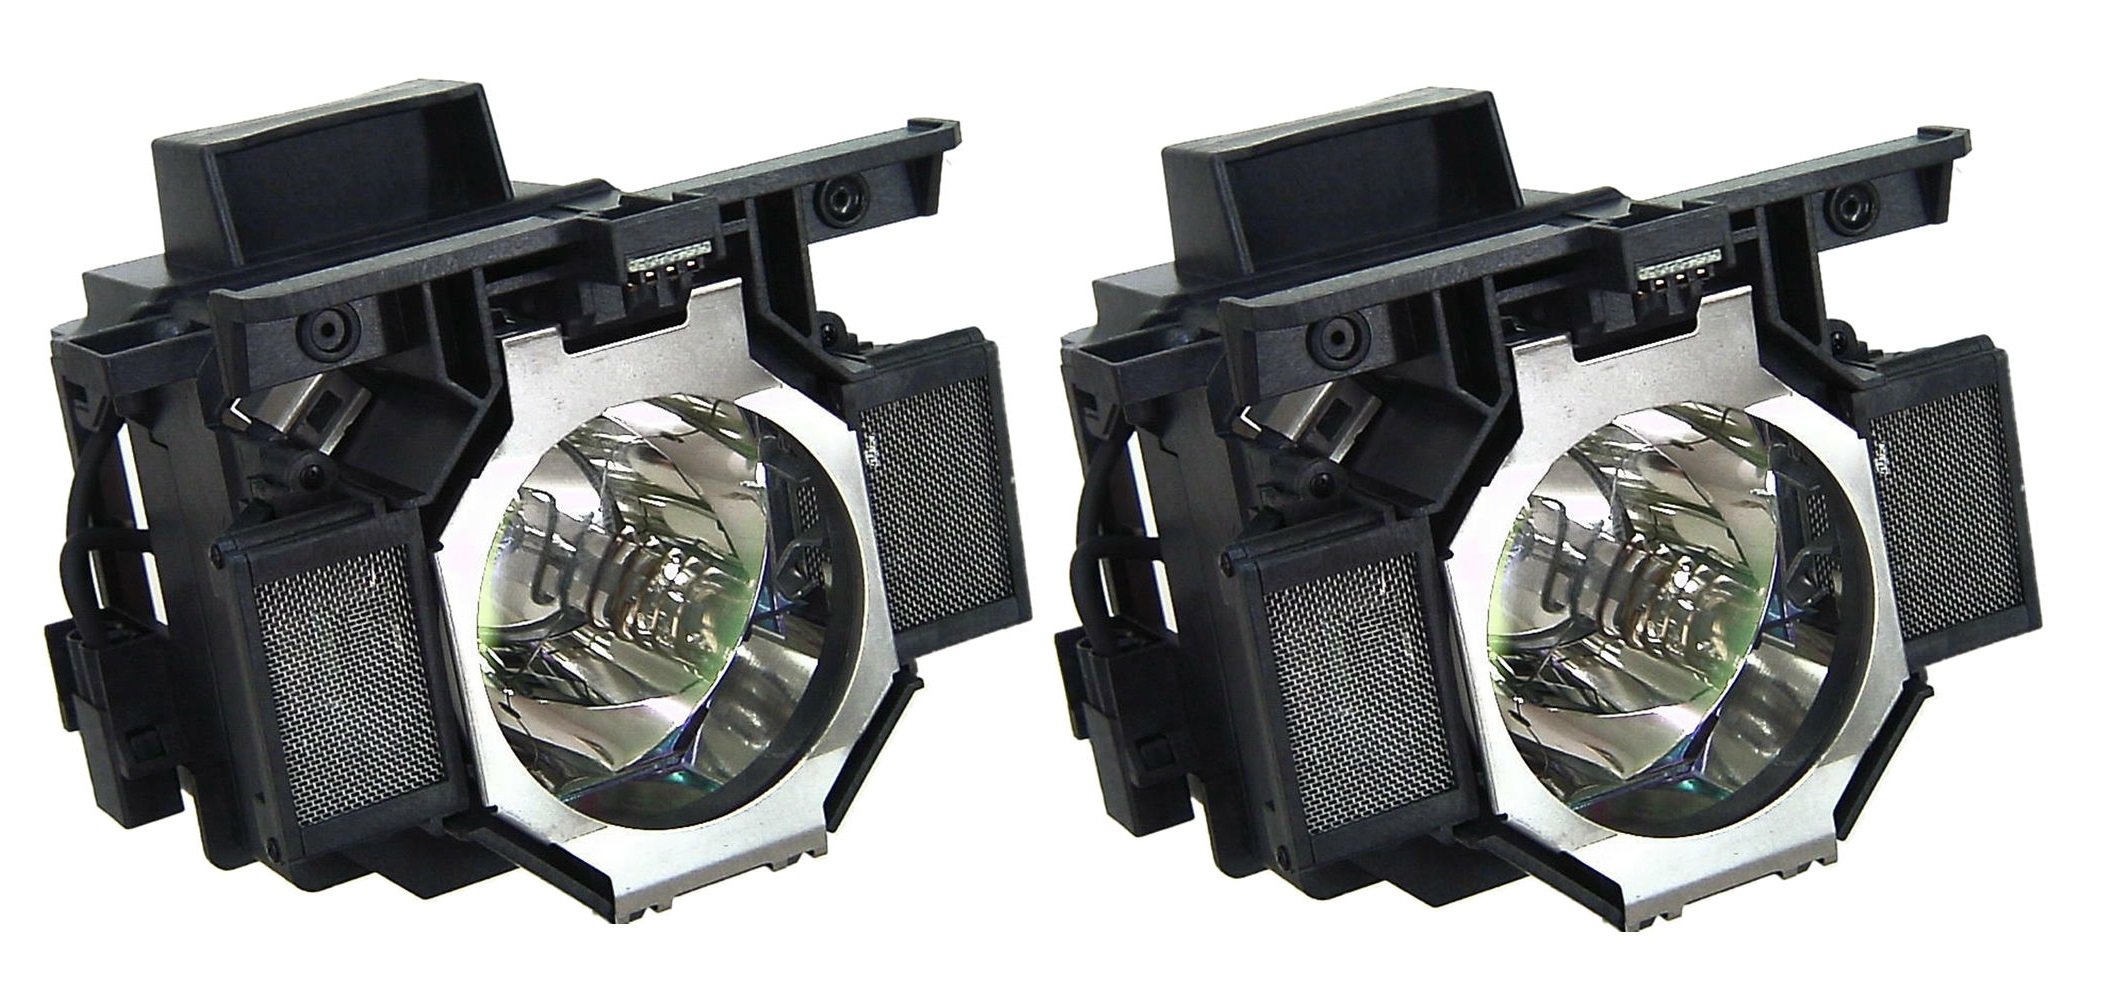 V13H010L73 Replacement Lamp & Housing for Epson Projectors - image 1 of 6